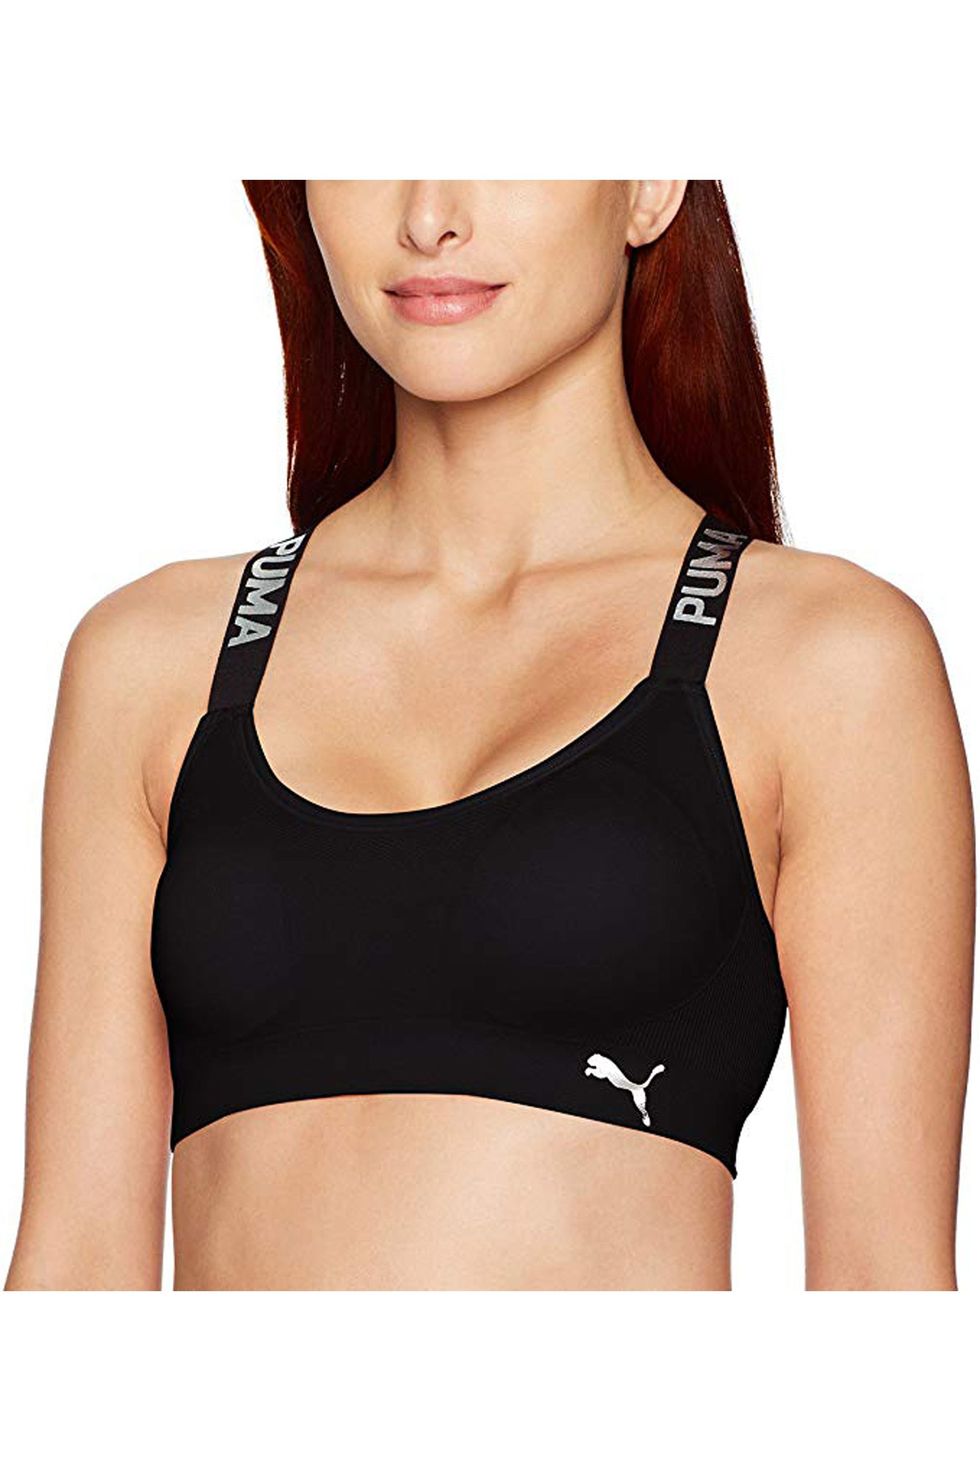 18 Best Sports Bras 2023 - Cute Sports Bras for All Cup Sizes